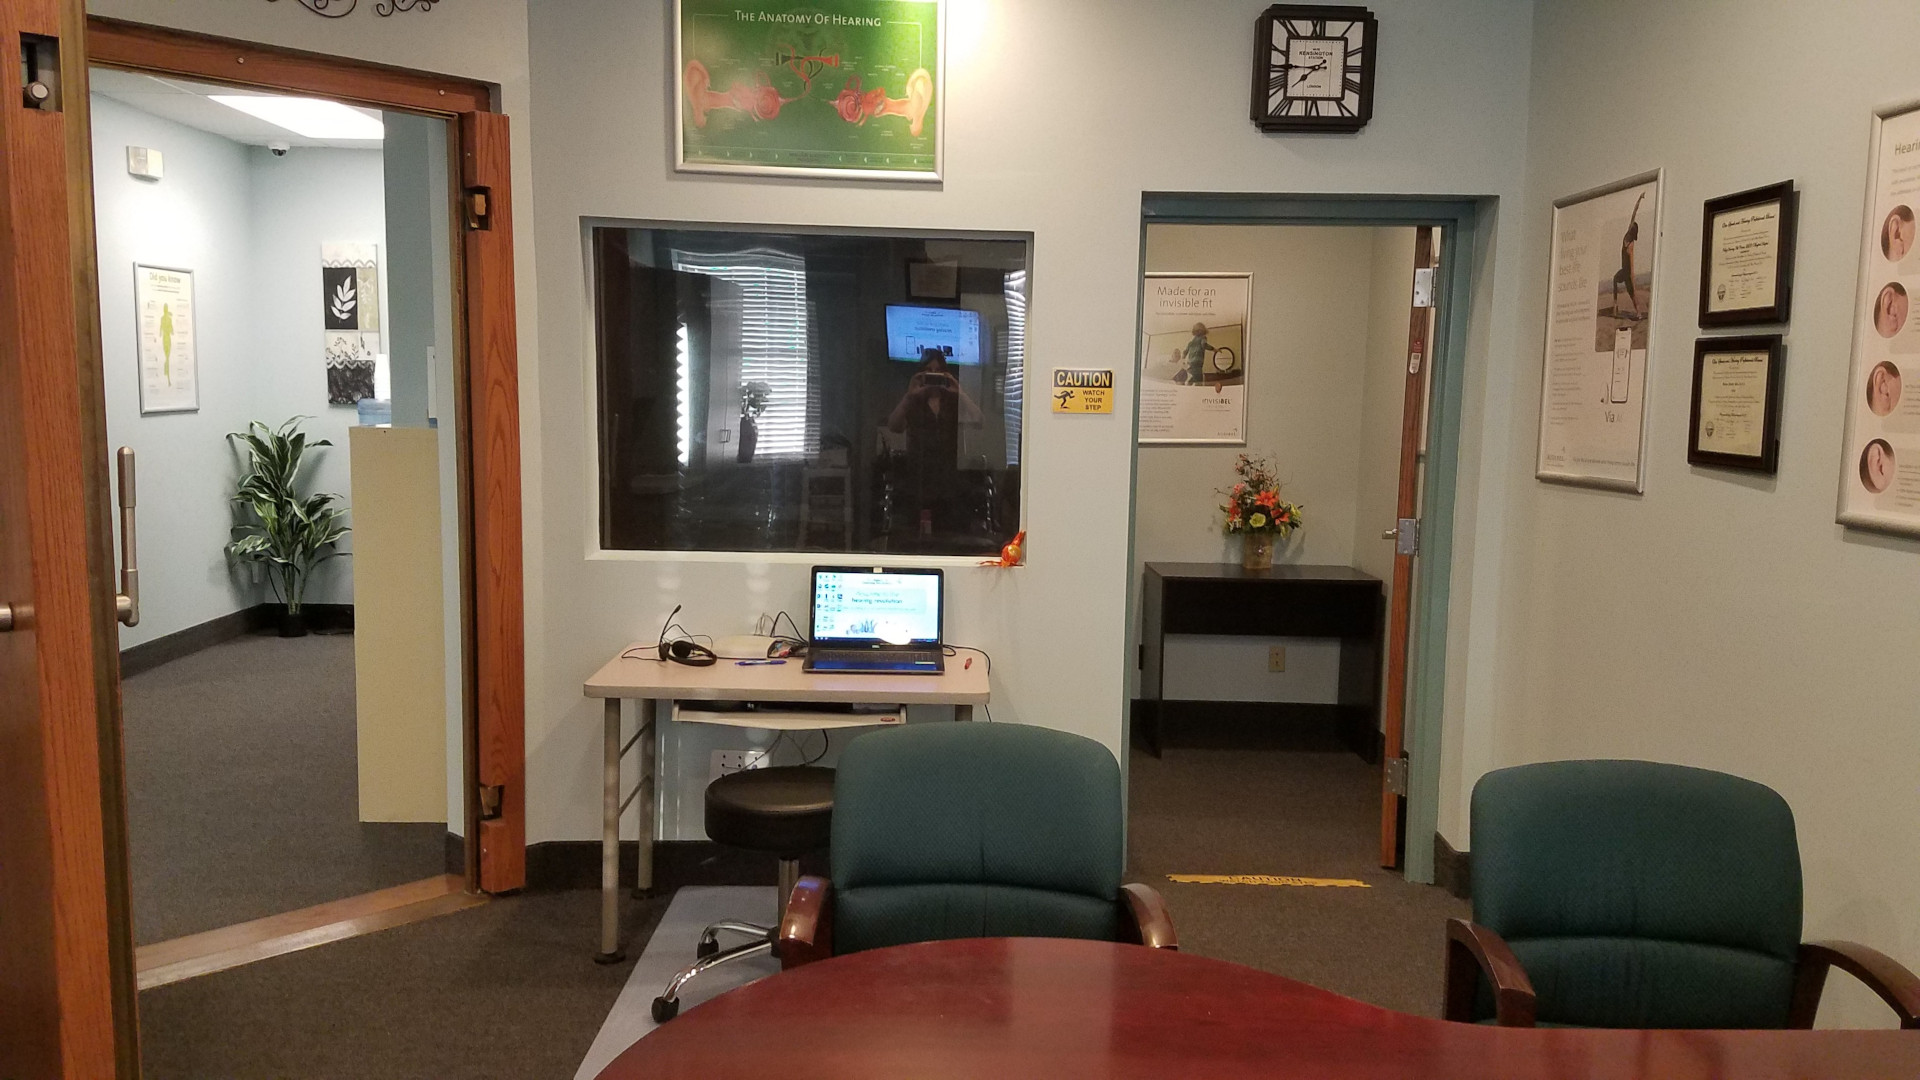 outside hearing test room in hearing specialist office with table and computer by window